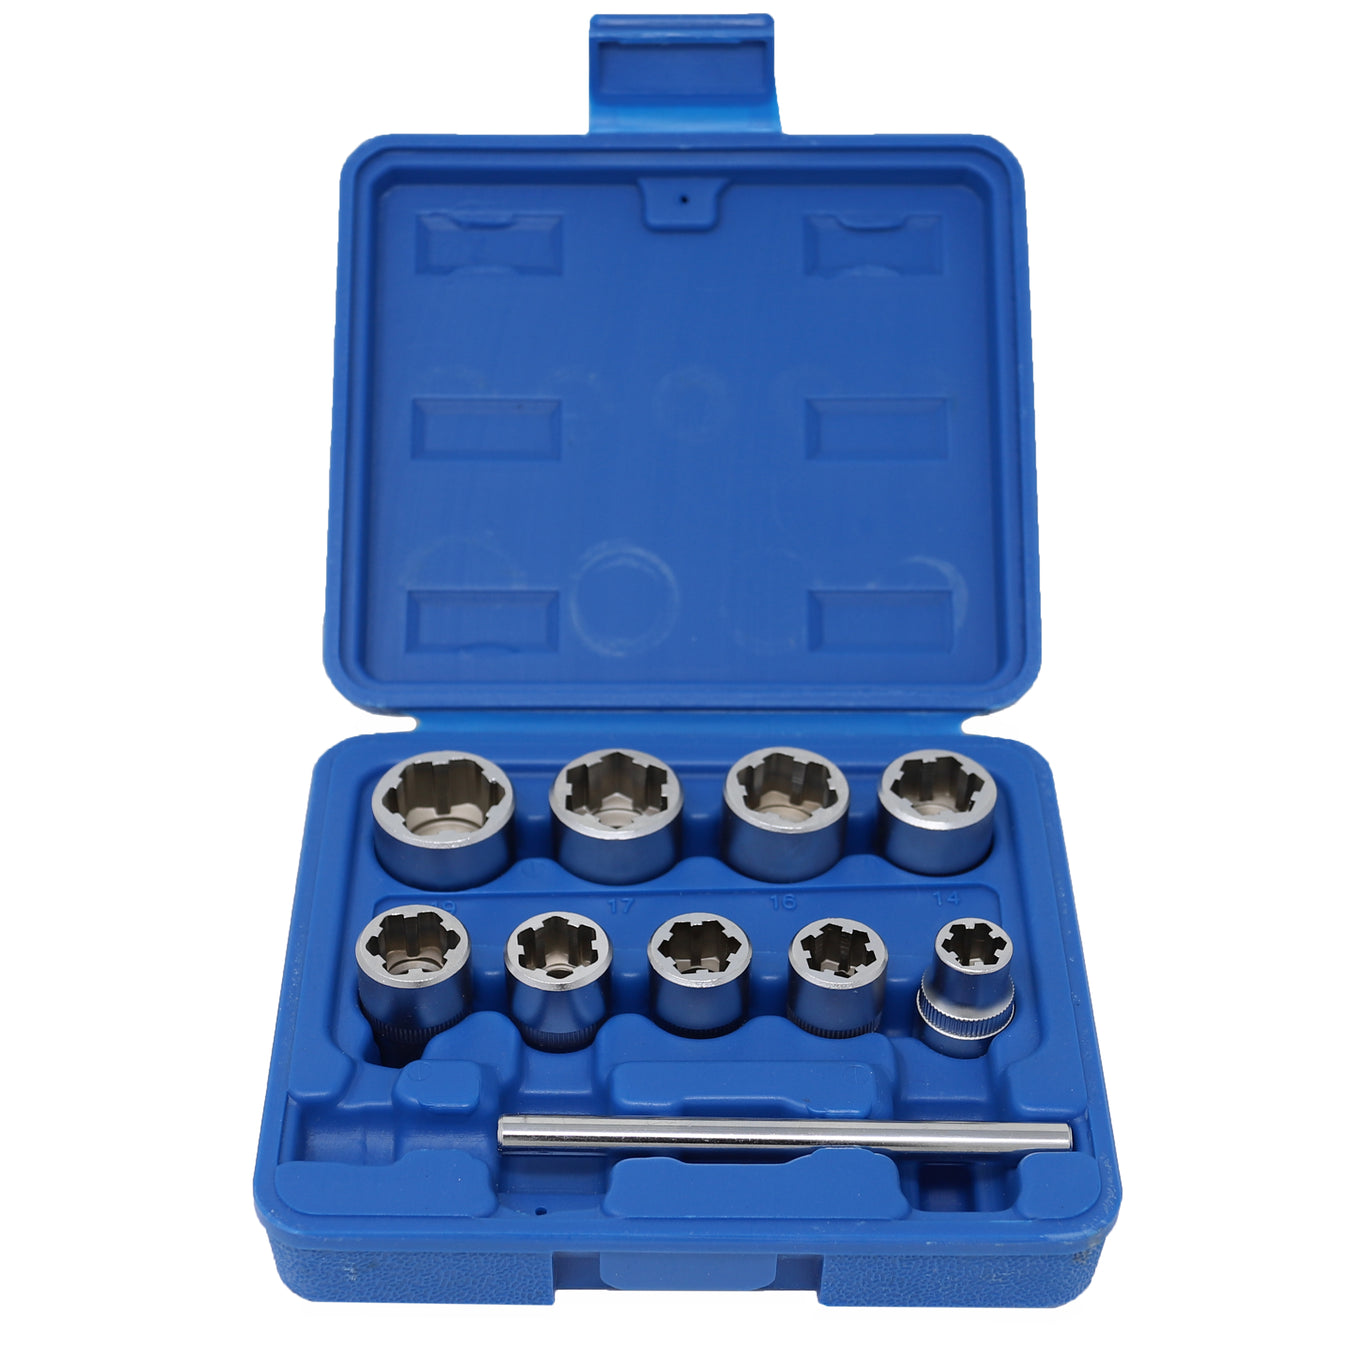 10 Pc. Bolt Extractor Sets